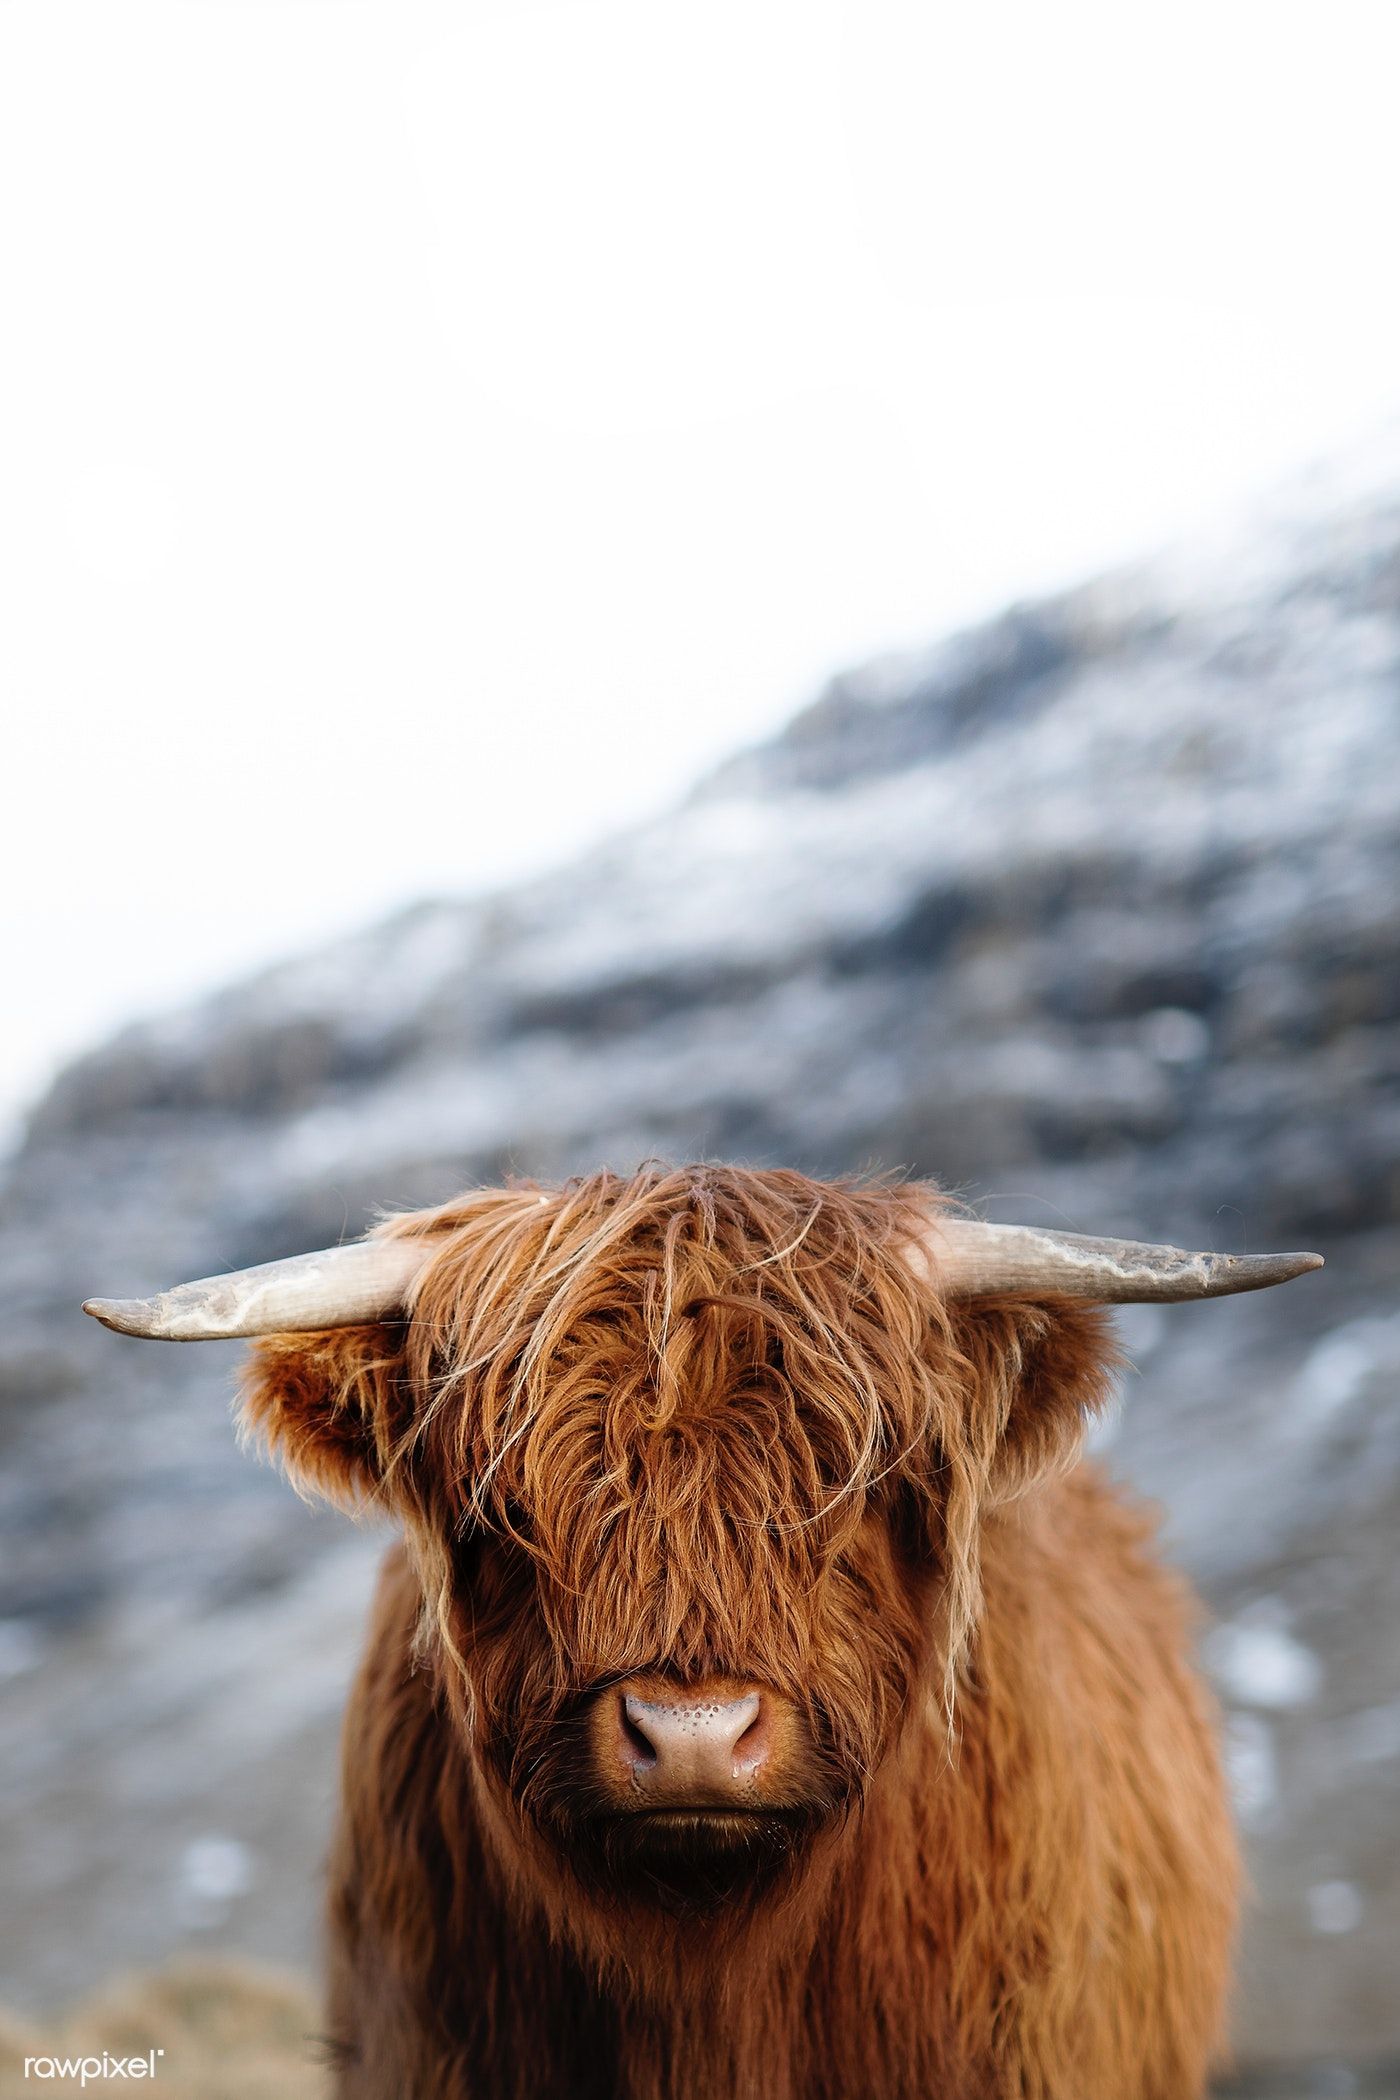 505072 5746x3836 Free images highland cattle rural farm cute scotland  hair farmlife animal highland portrait cattle hairy livestock face  cow  Rare Gallery HD Wallpapers